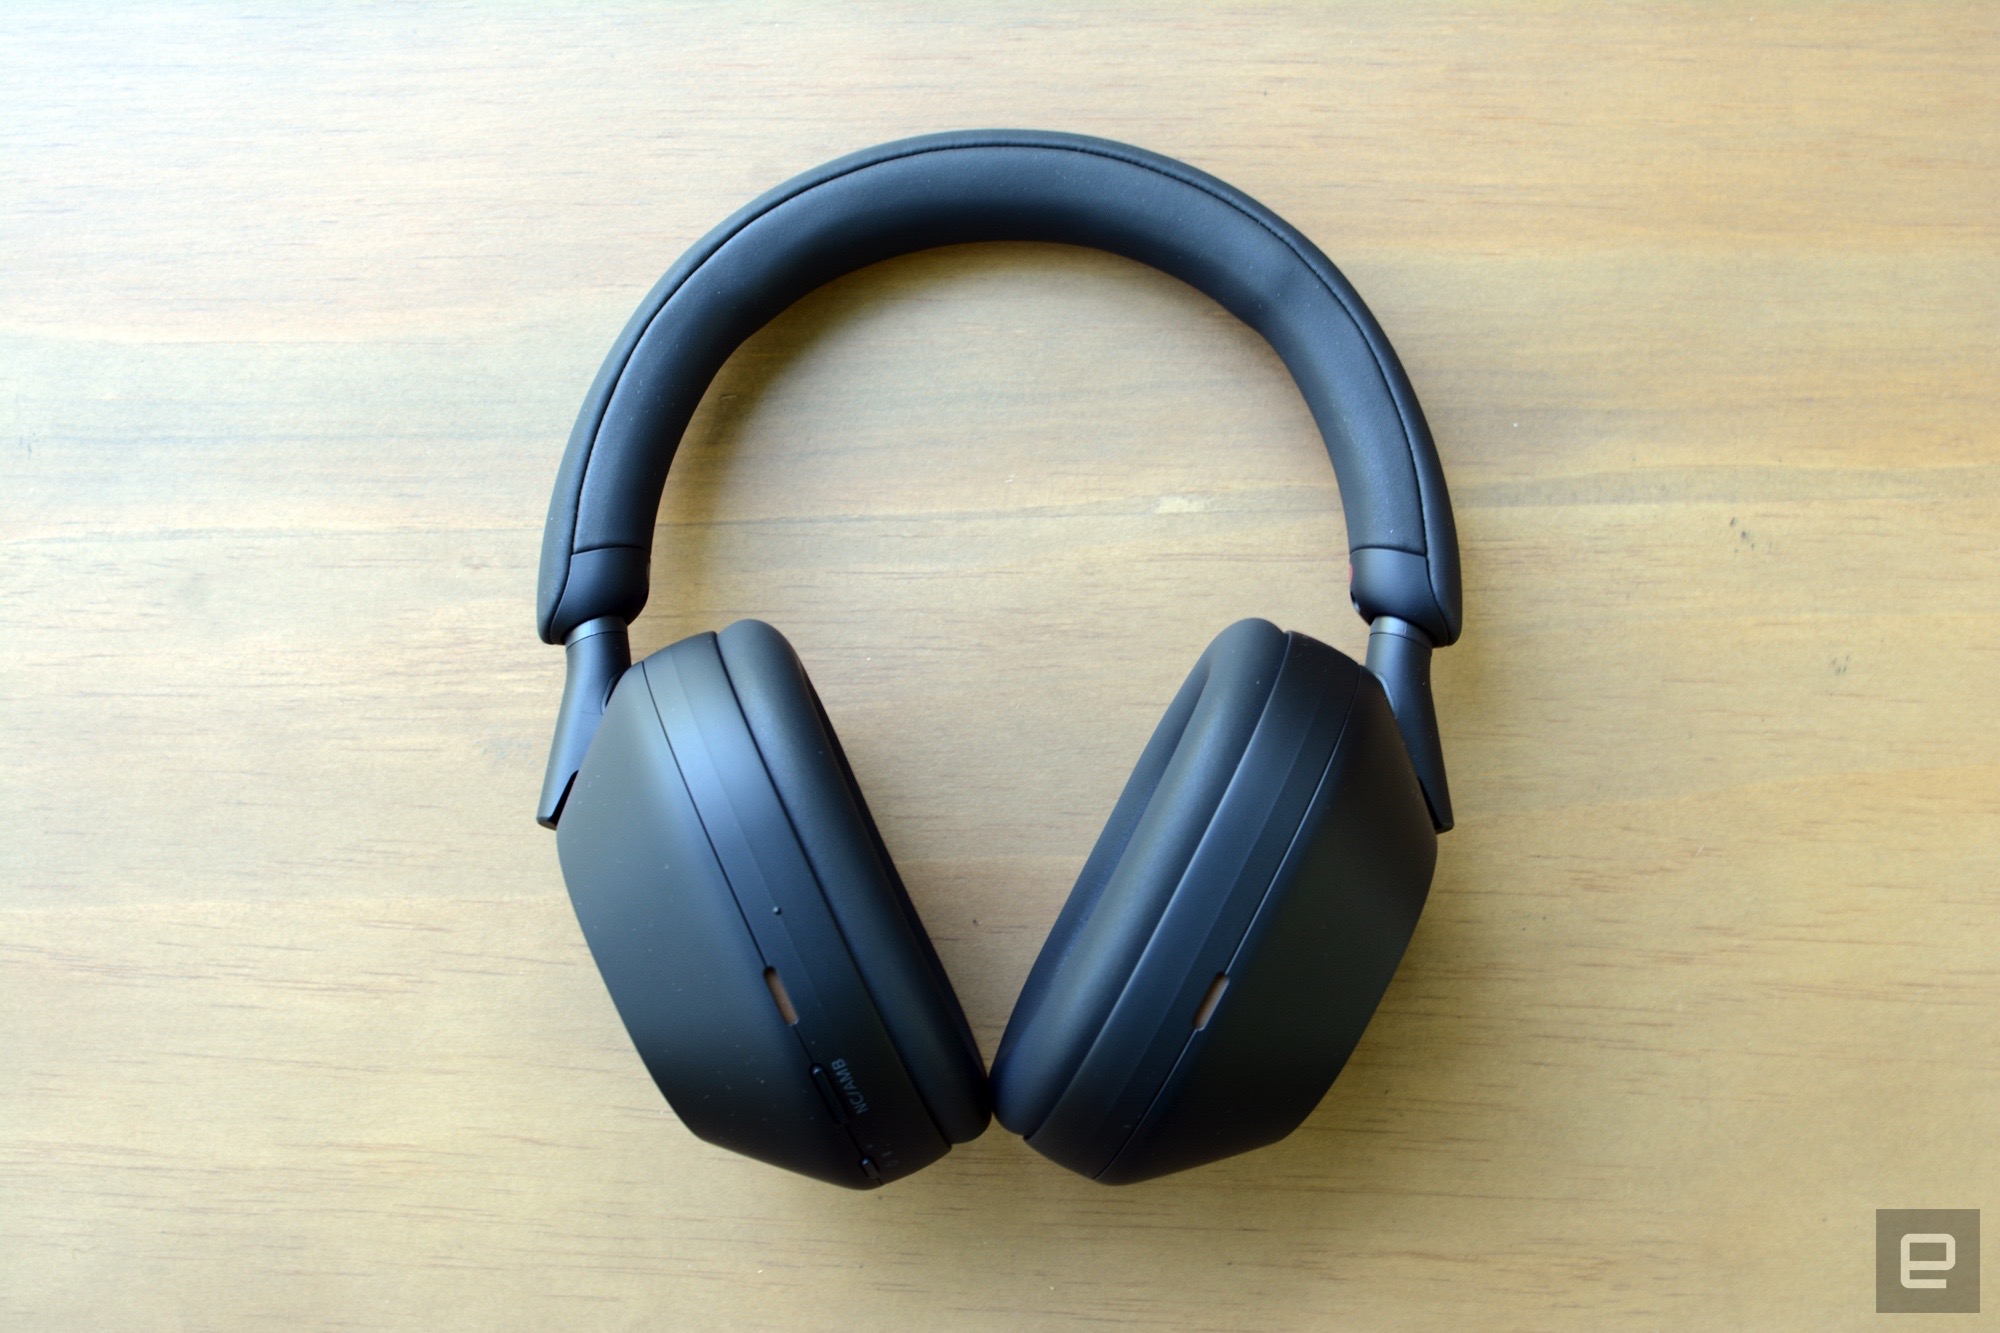 With upgrades to design, sound quality and active noise cancellation, the WH-1000XM5 keeps its place above the competition. These headphones are super comfortable as well, and 30-hour battery life is more than adequate. The M5 makes it clear that Sony wont be dethroned anytime soon.